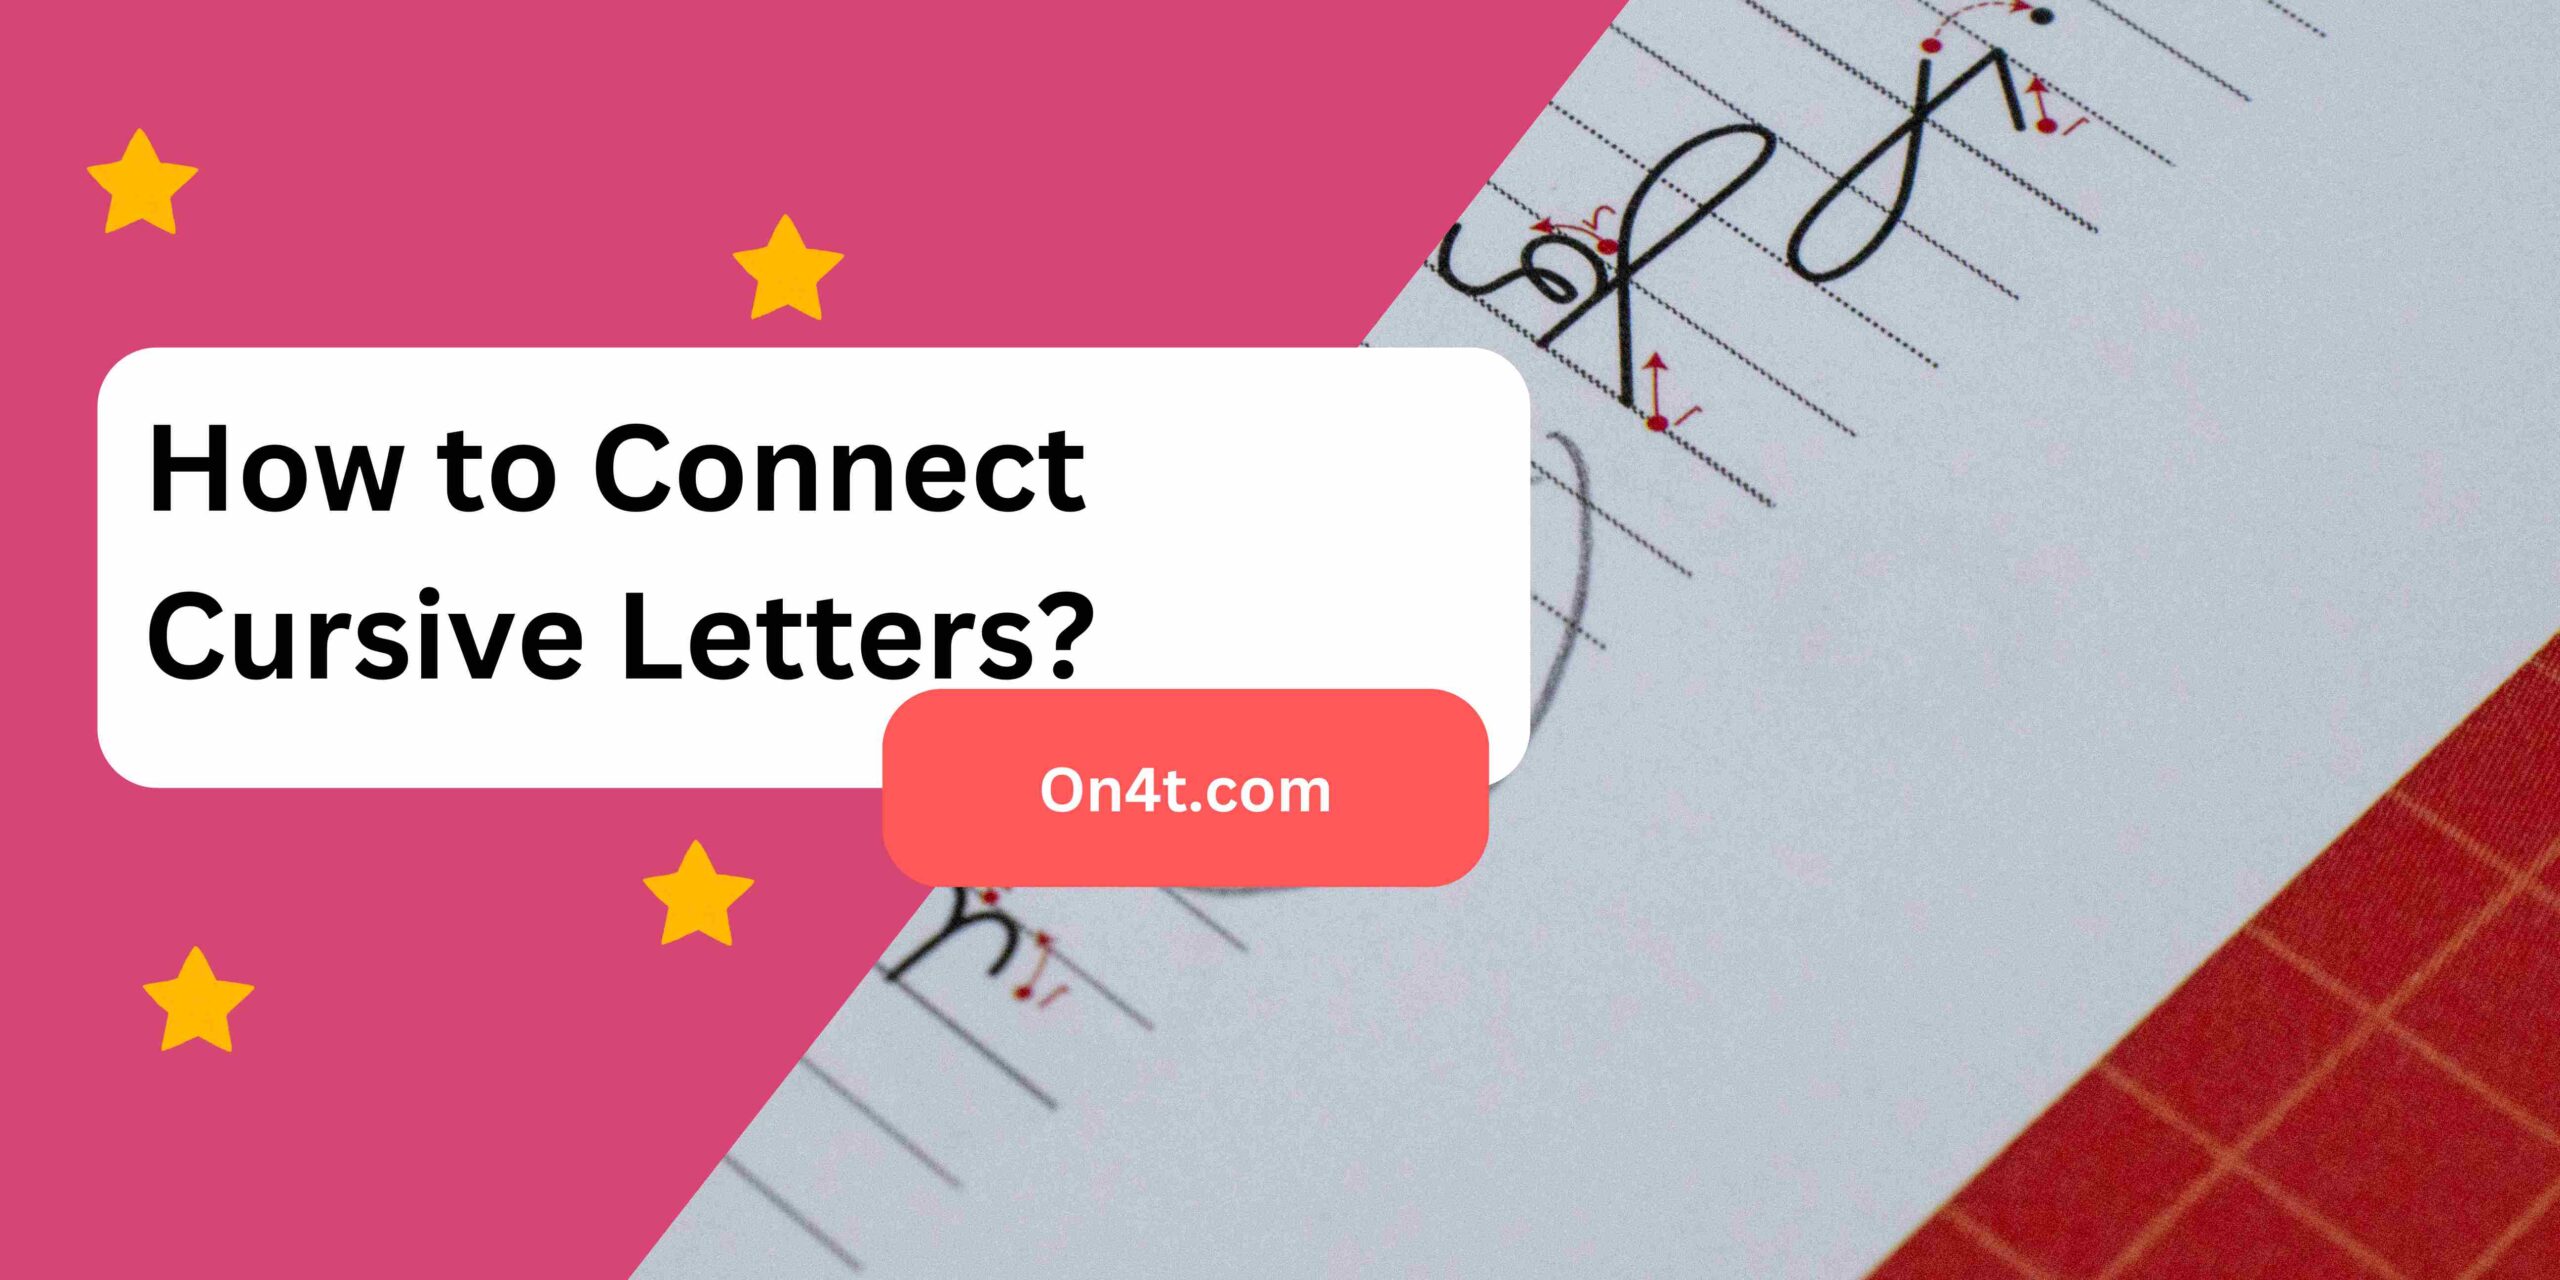 How to Connect Cursive Letters